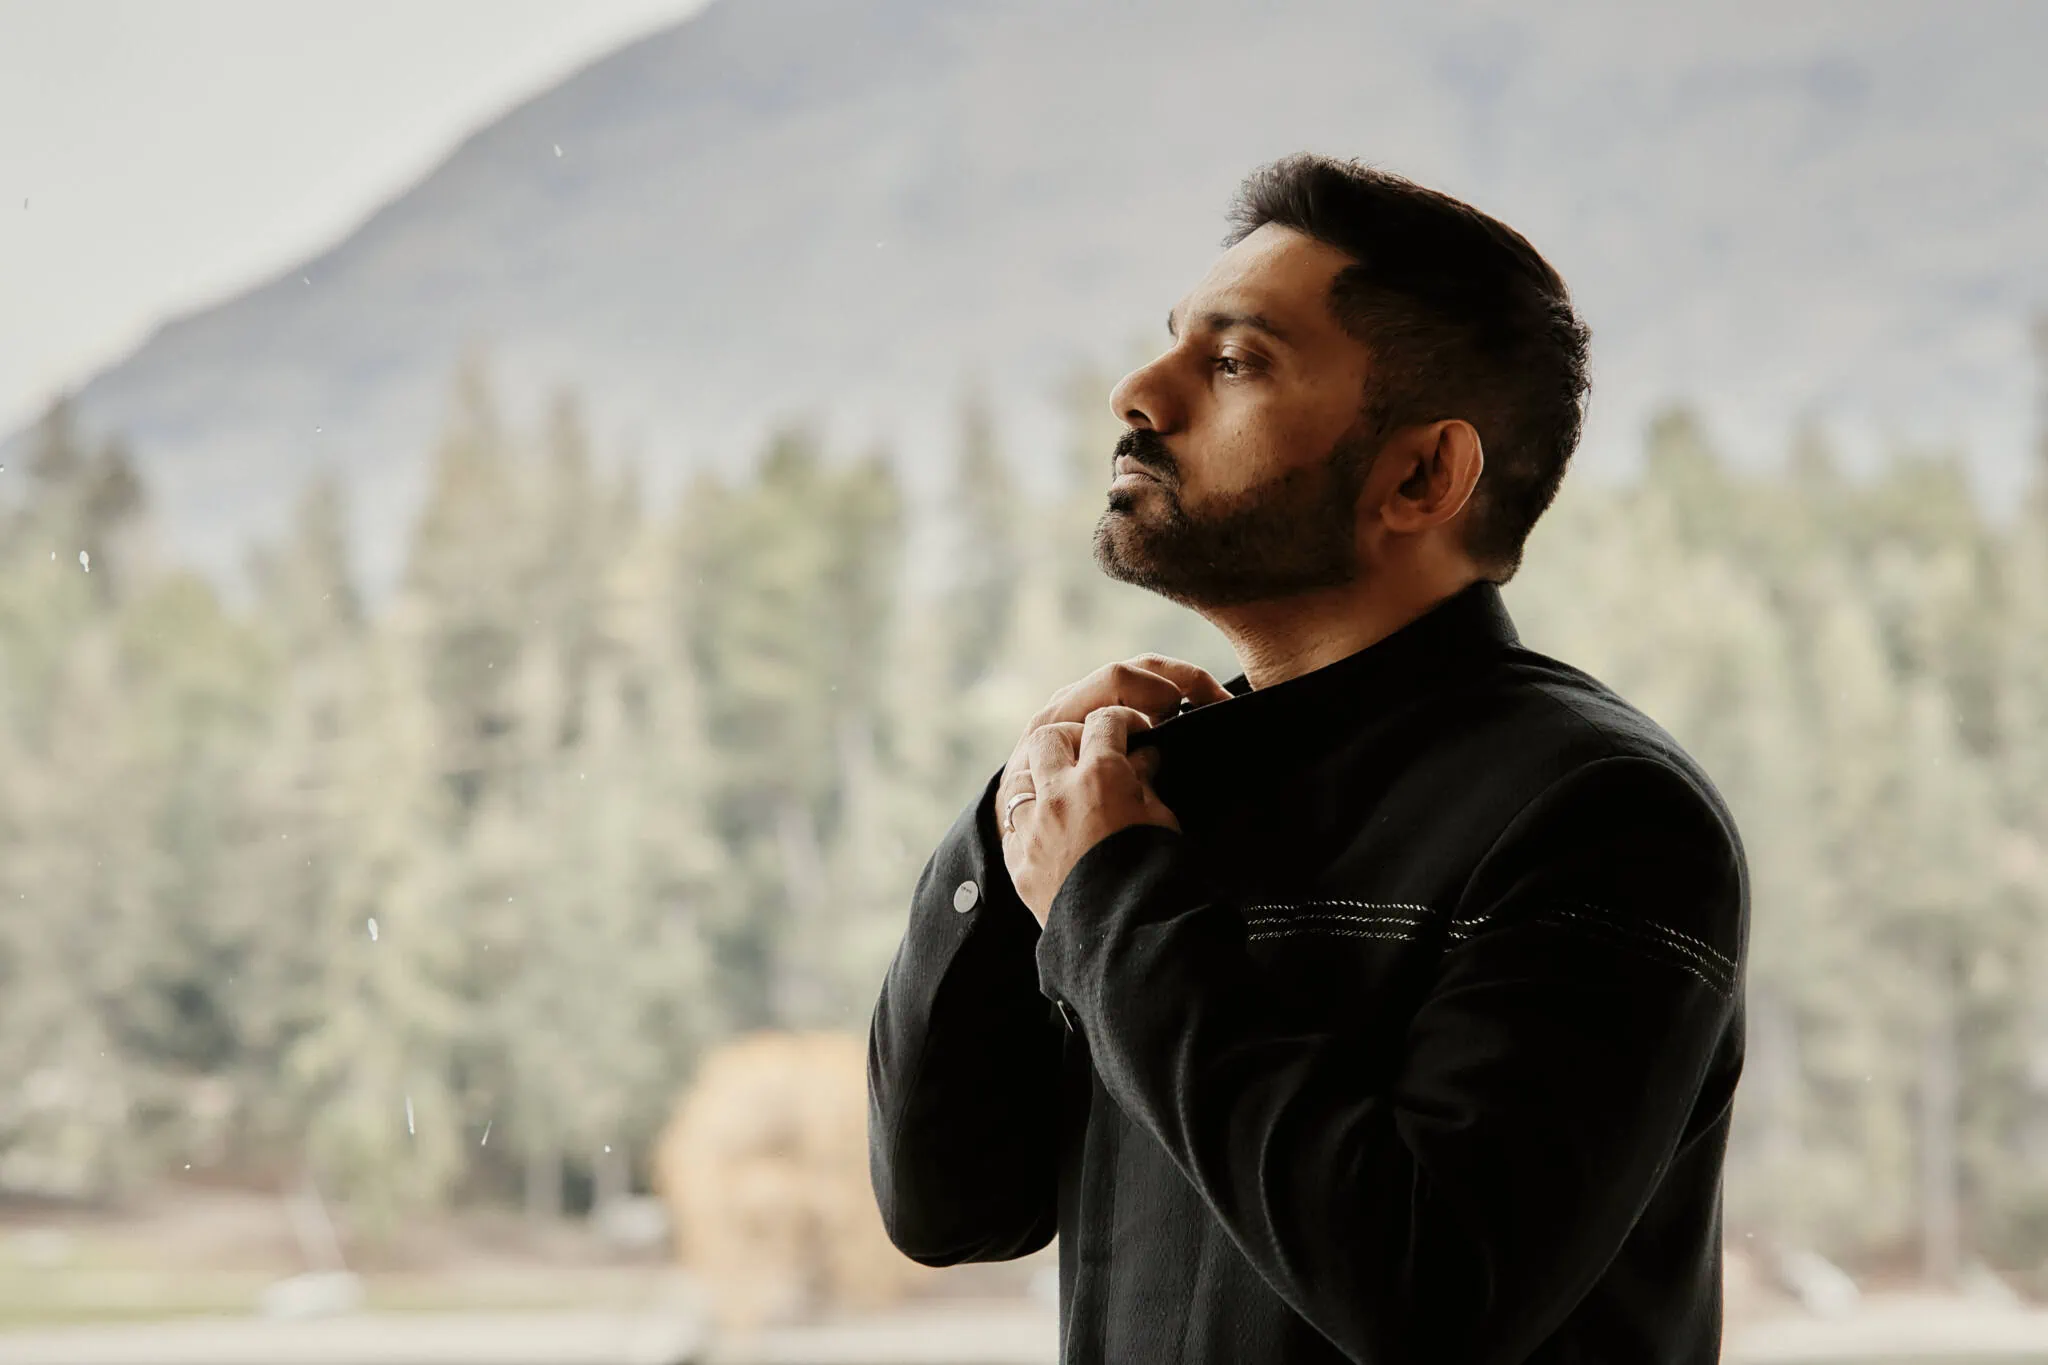 Queenstown New Zealand Elopement Wedding Photographer - Wasim and Yumn celebrate their Islamic wedding in Queenstown with a breathtaking view of a man standing in front of a lake with mountains in the background.